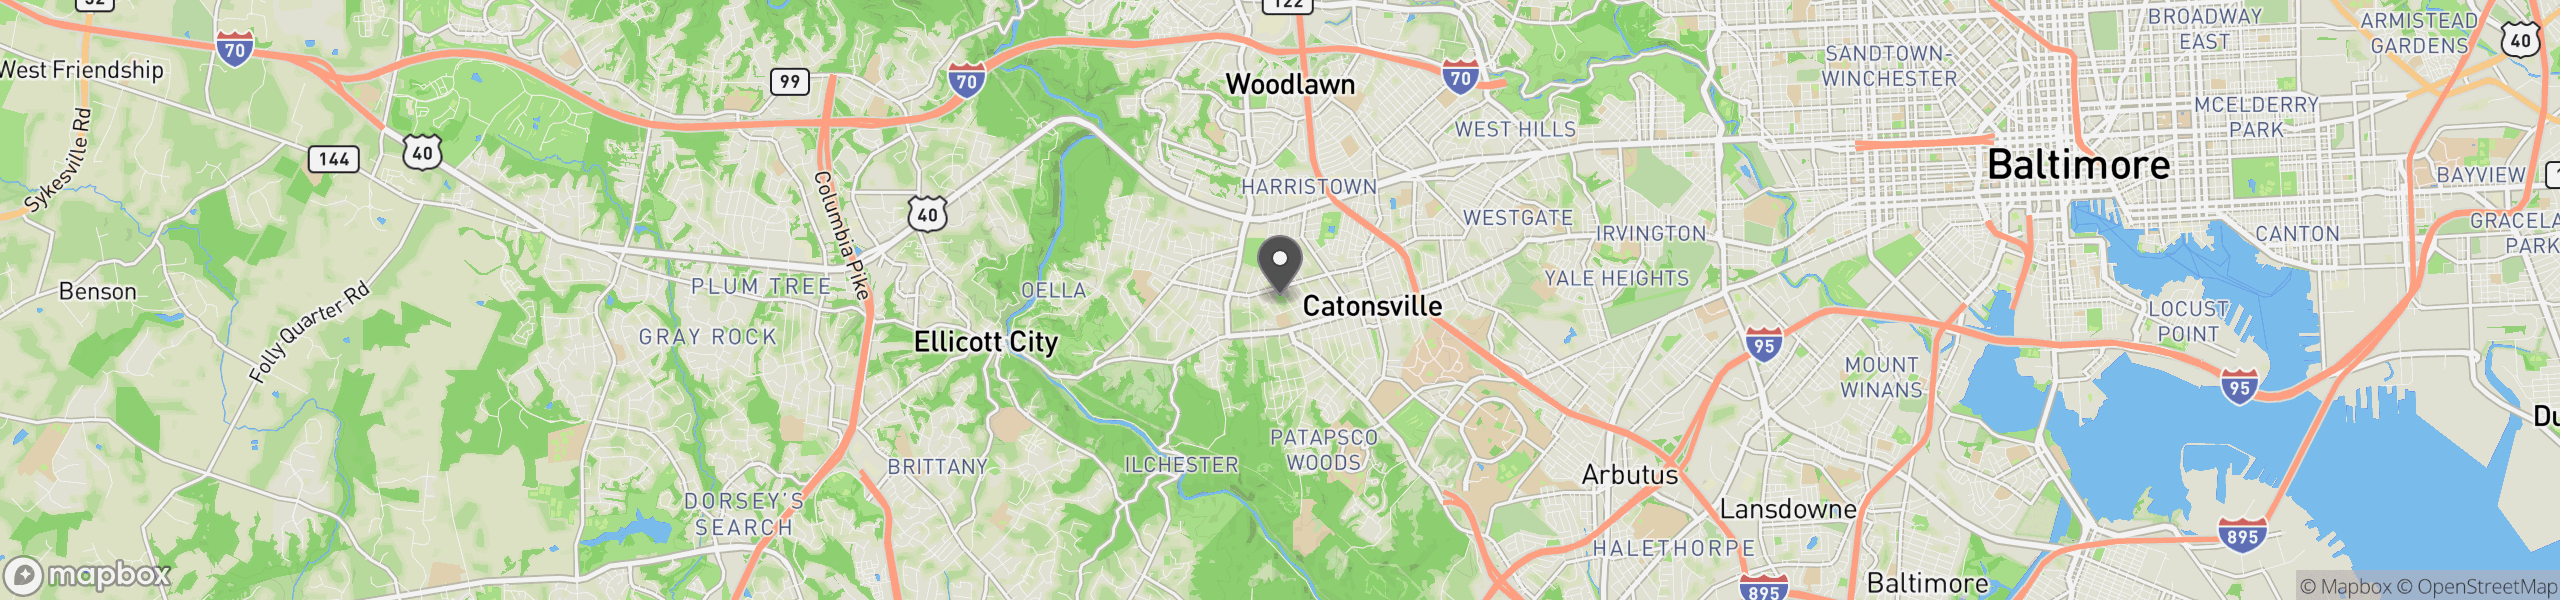 Catonsville, MD 21228